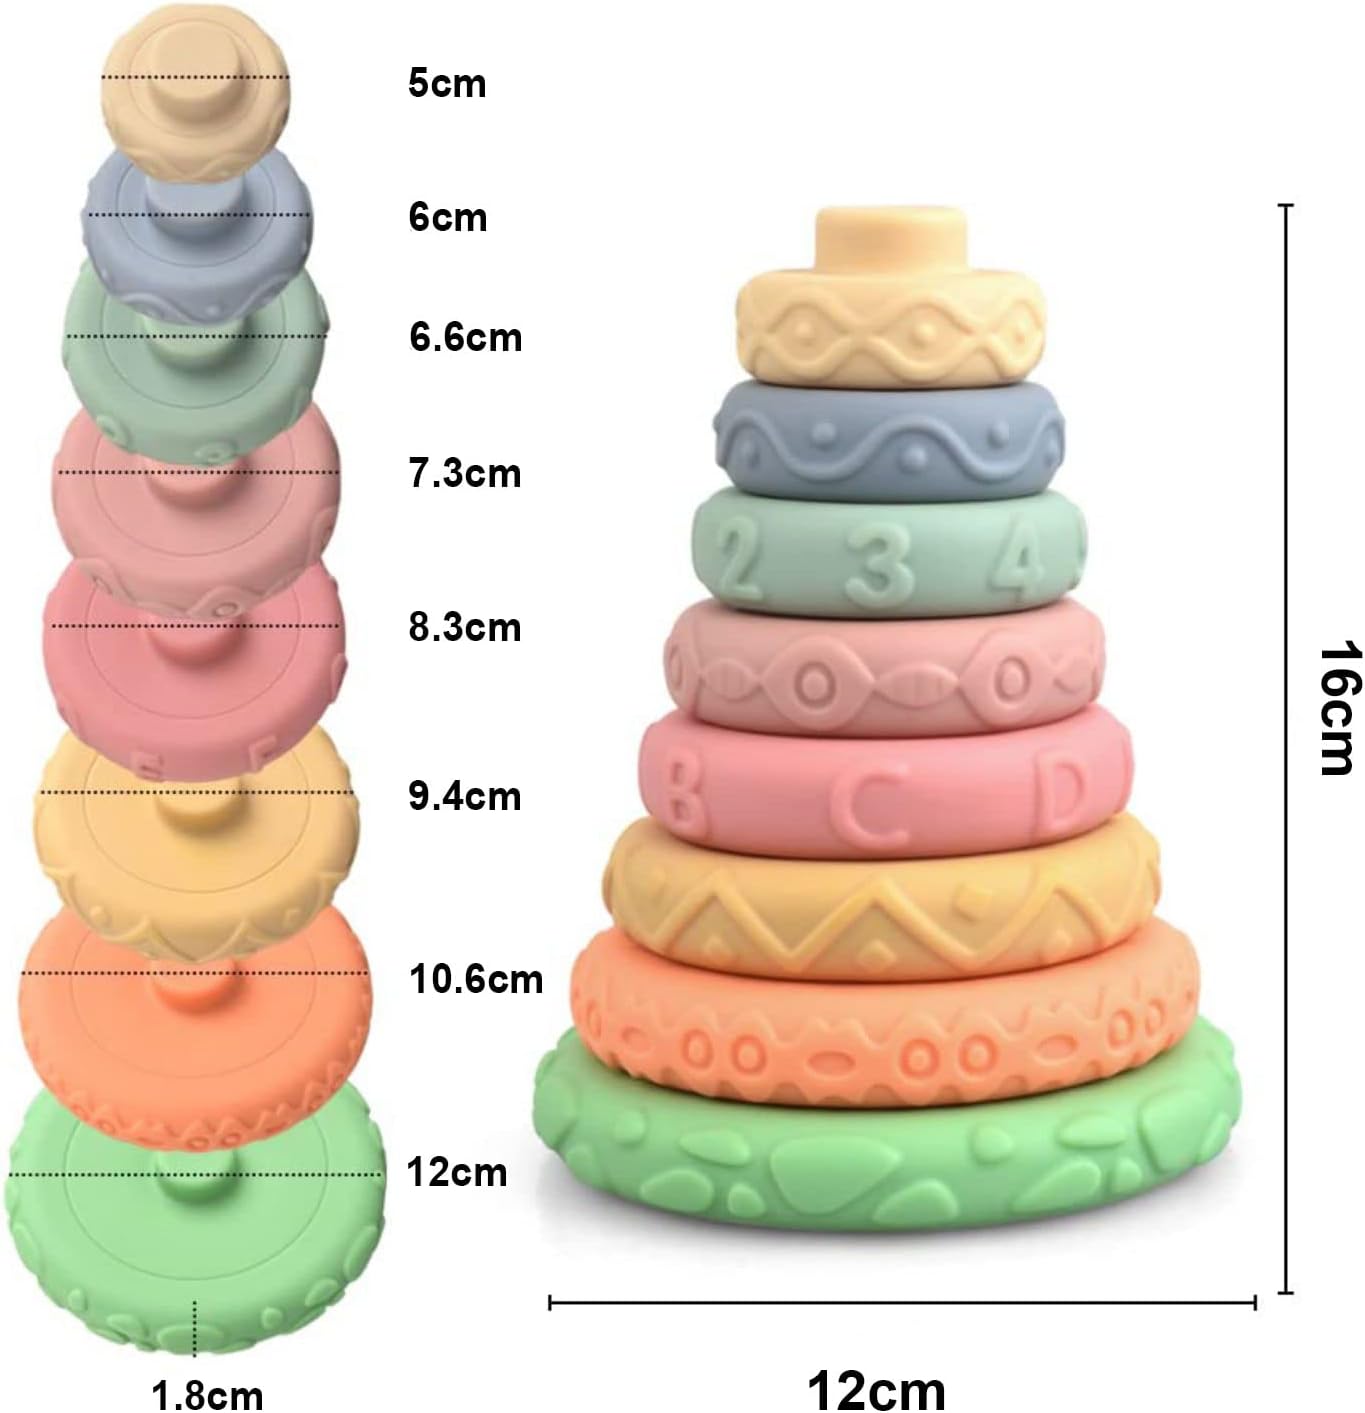 Arabest 8pcs Soft Building Blocks, Baby Stacking and Nesting Toys, Silicone Stacking Rings Toy Stacker, Natural Baby Toys, Educational Squeeze Teether Sensory Montessori Toys for Babies 6 12 Months